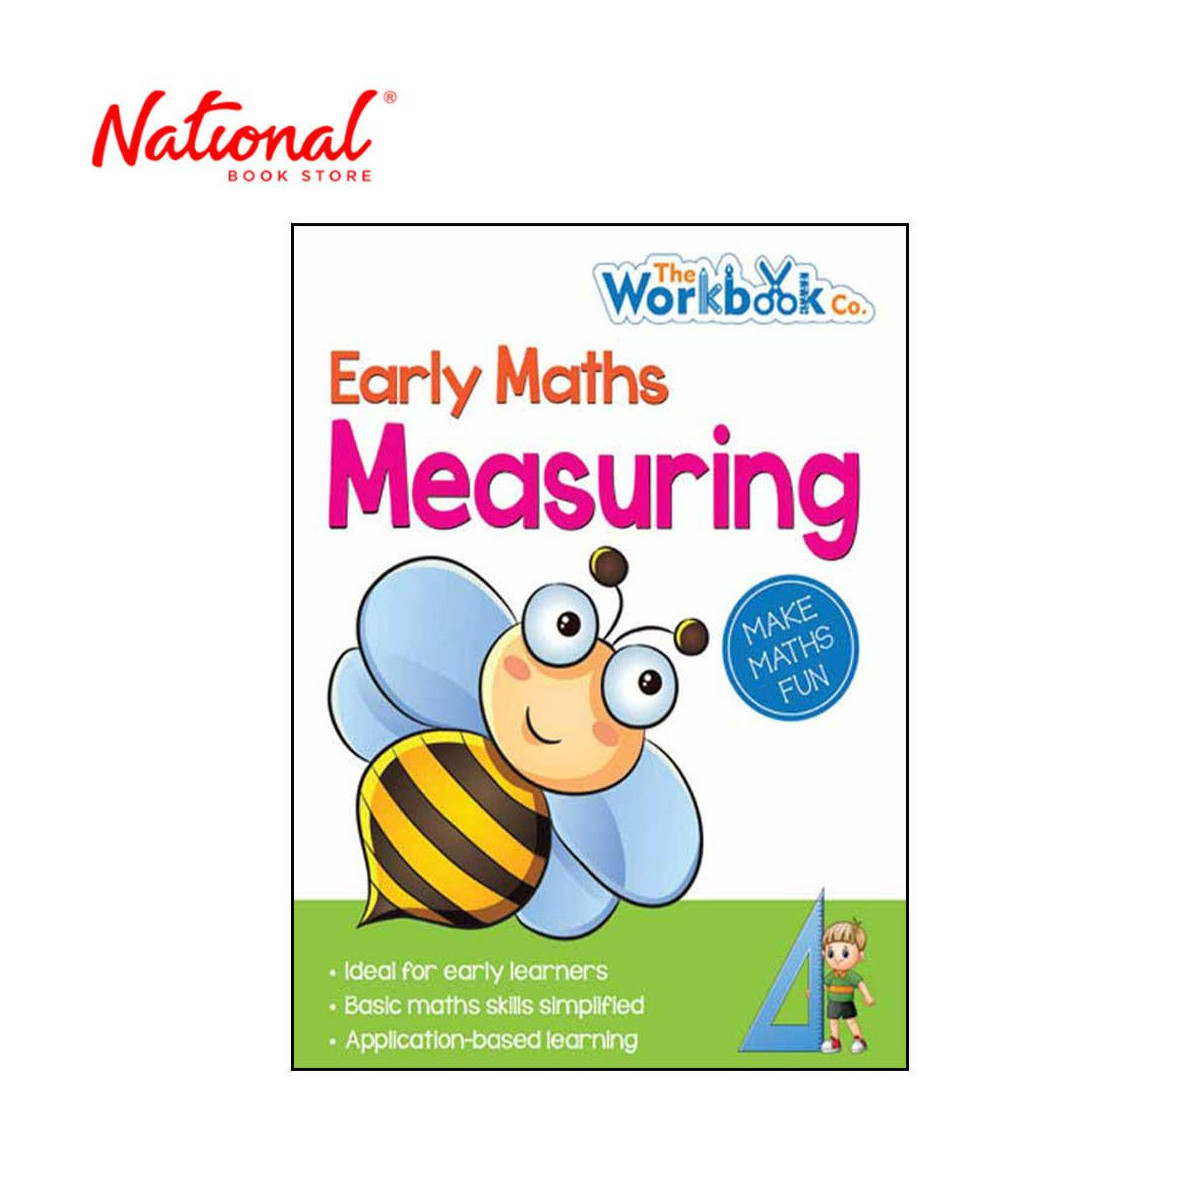 Early Maths: Measuring - Trade Paperback - Workbook for Kids